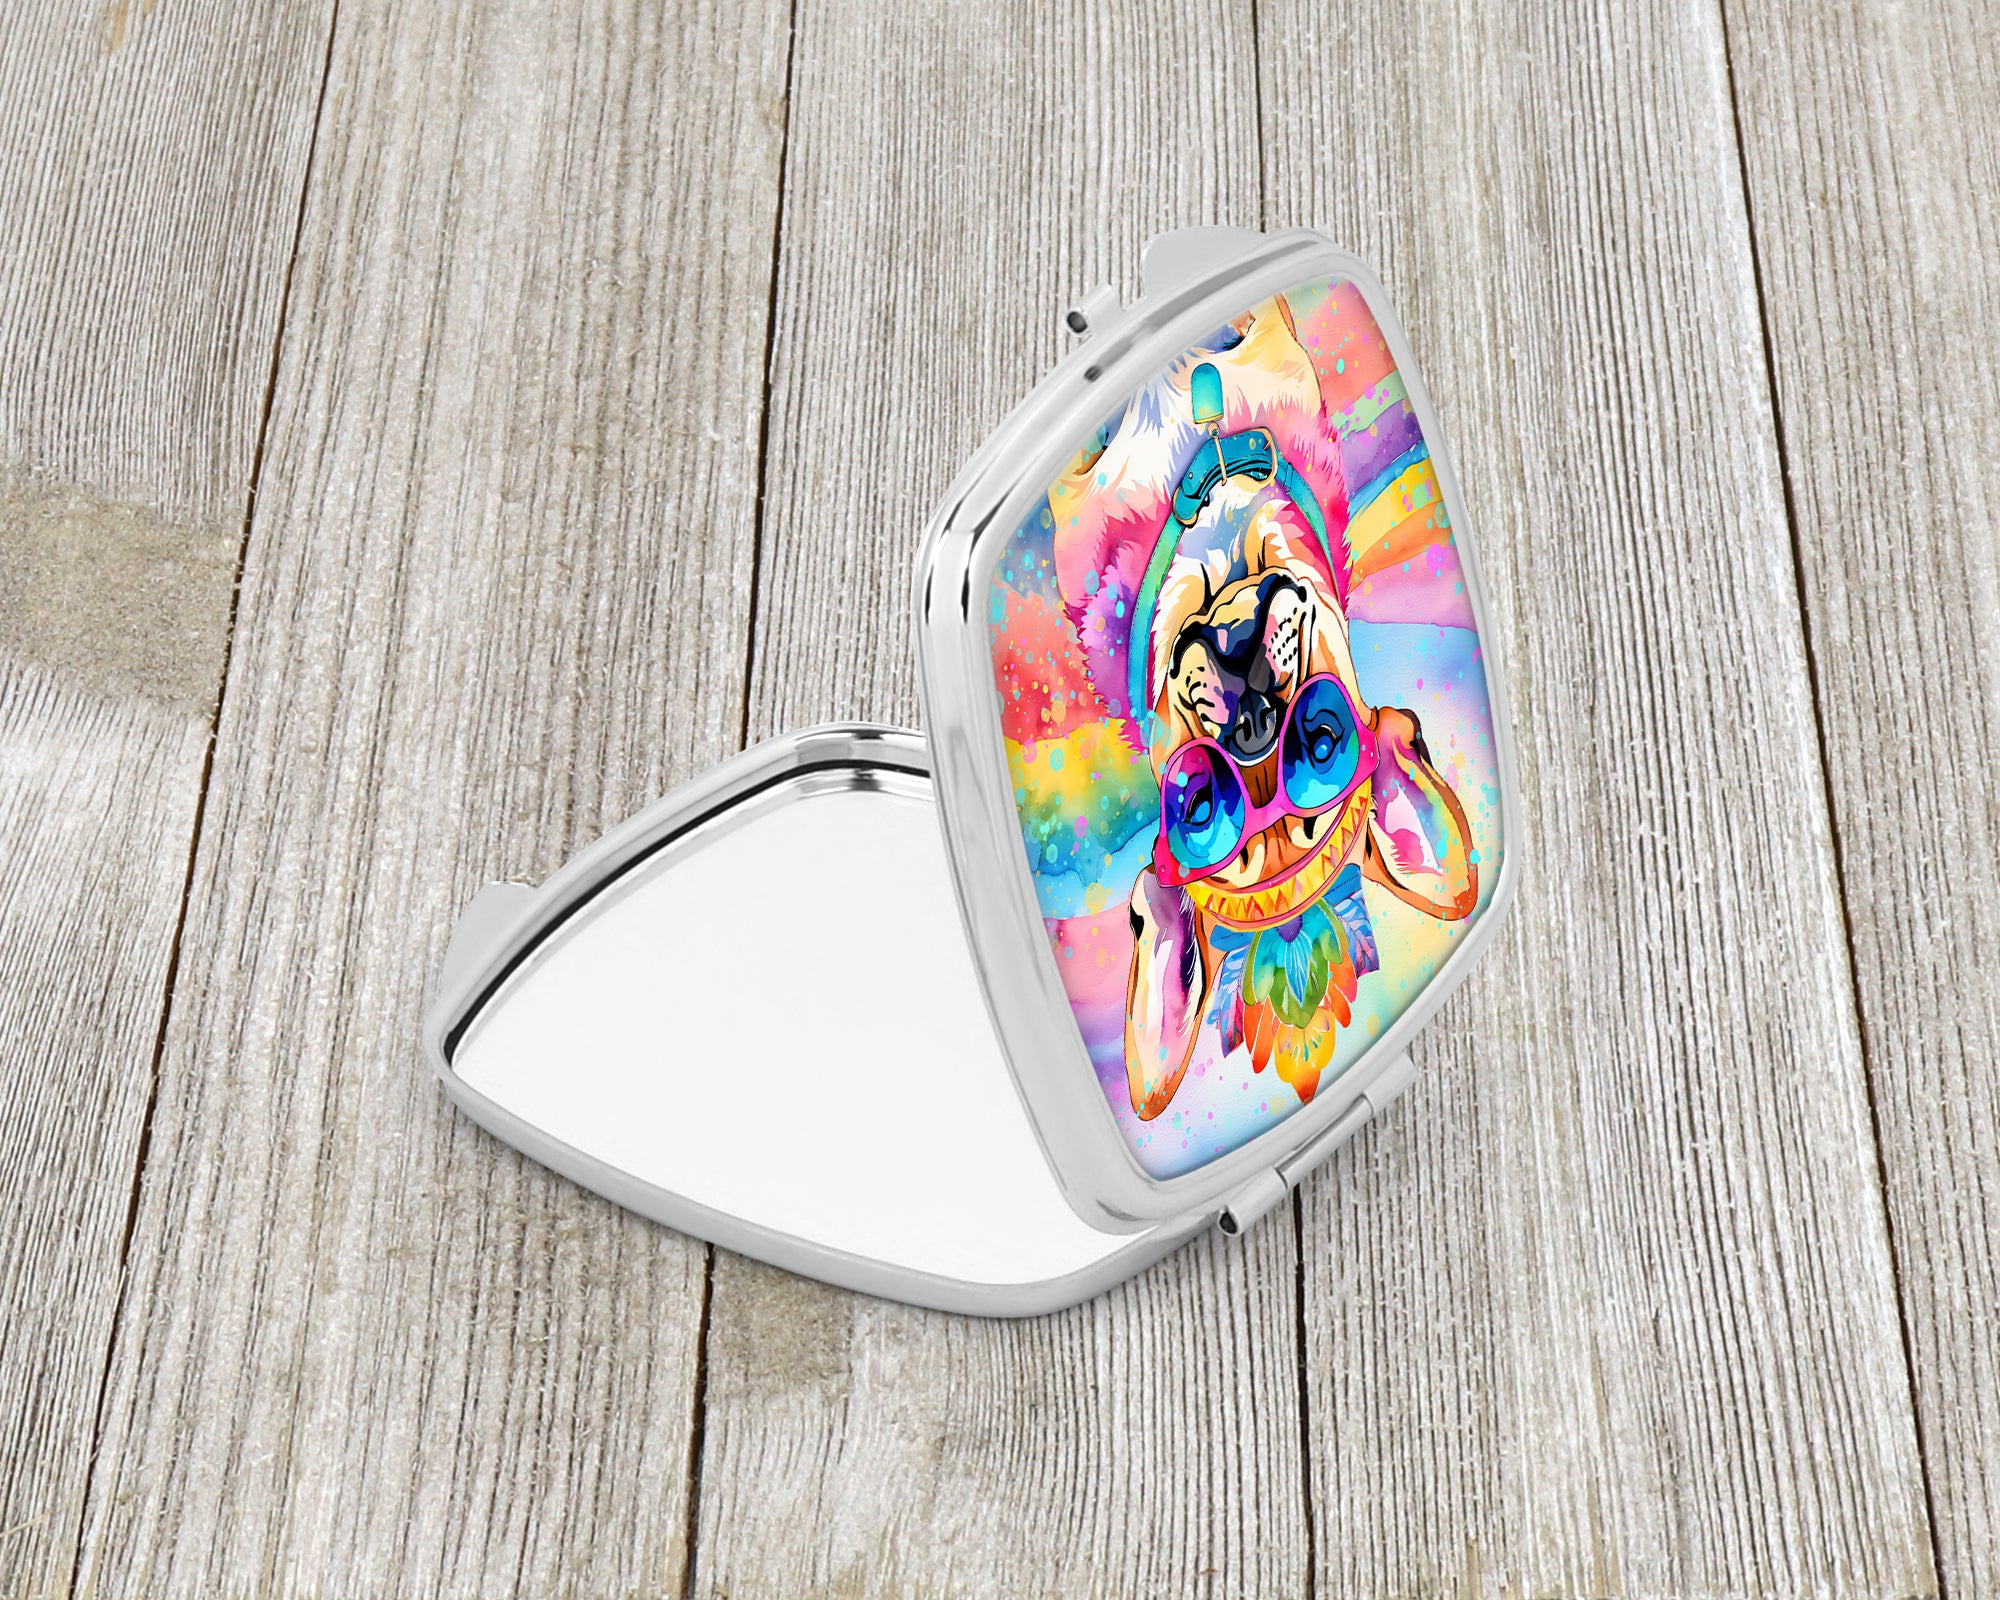 Buy this Pug Hippie Dawg Compact Mirror